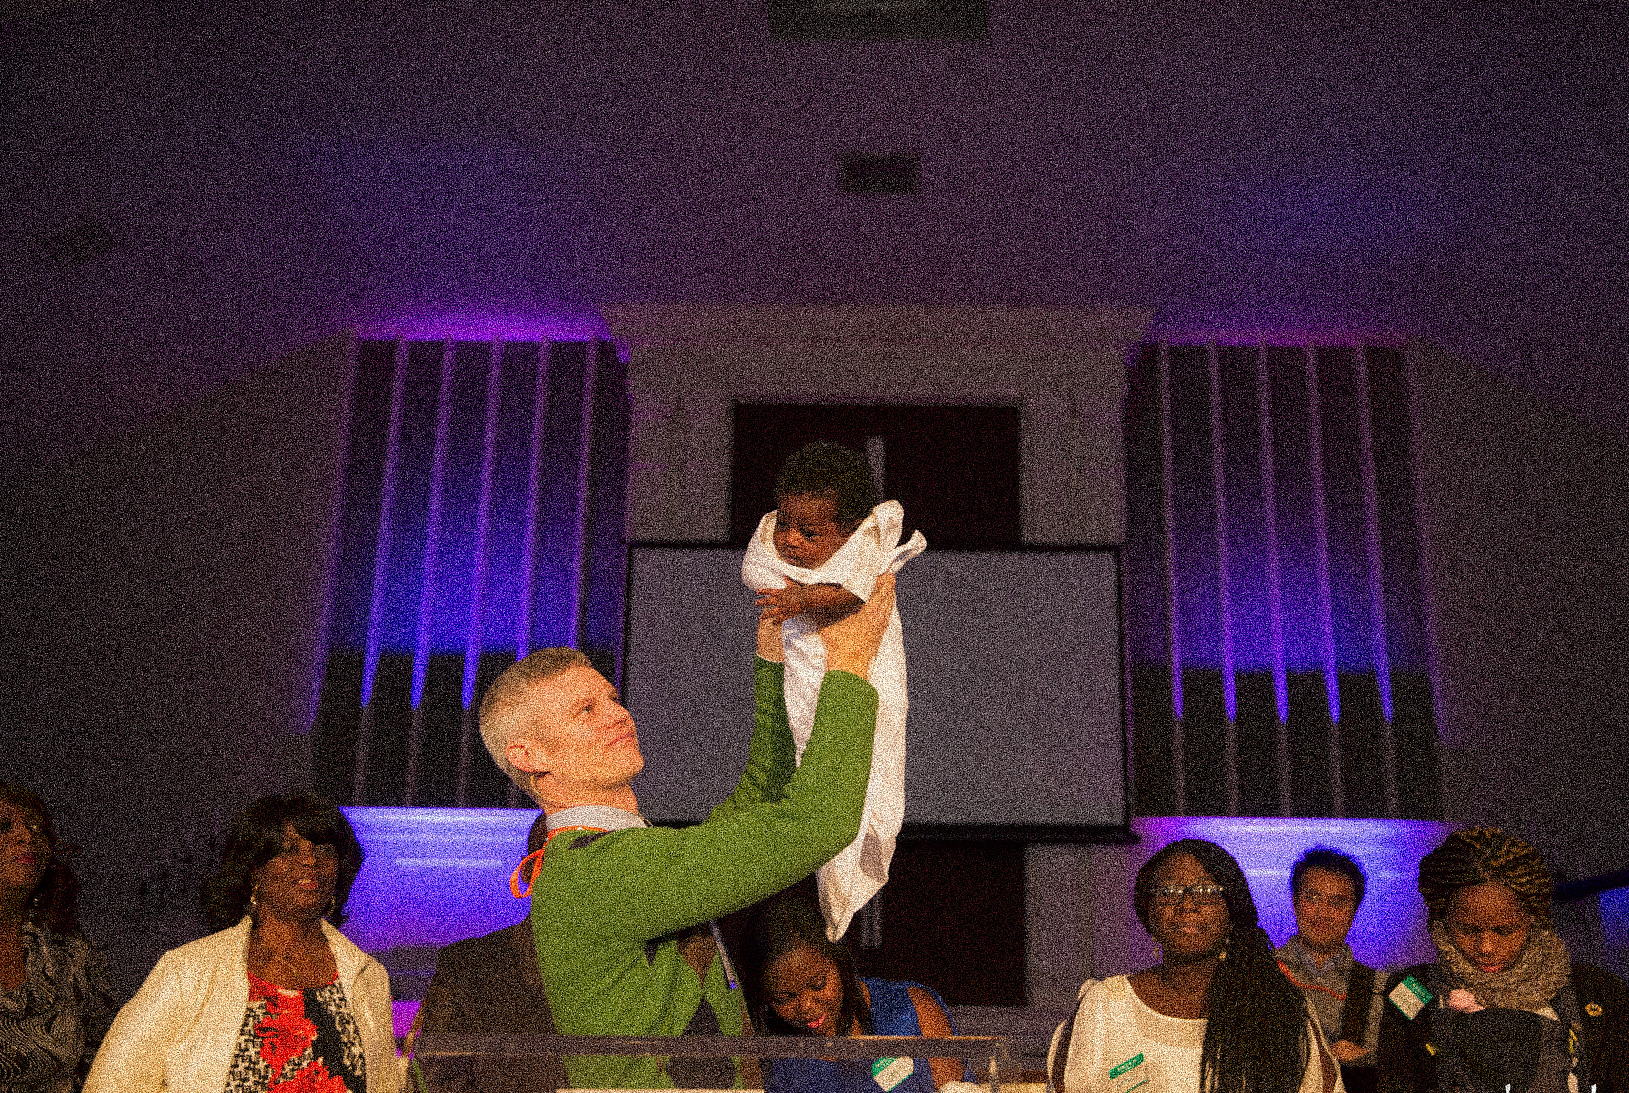 Pastor Stephen lifting a baby up to present to the church after it's dedication